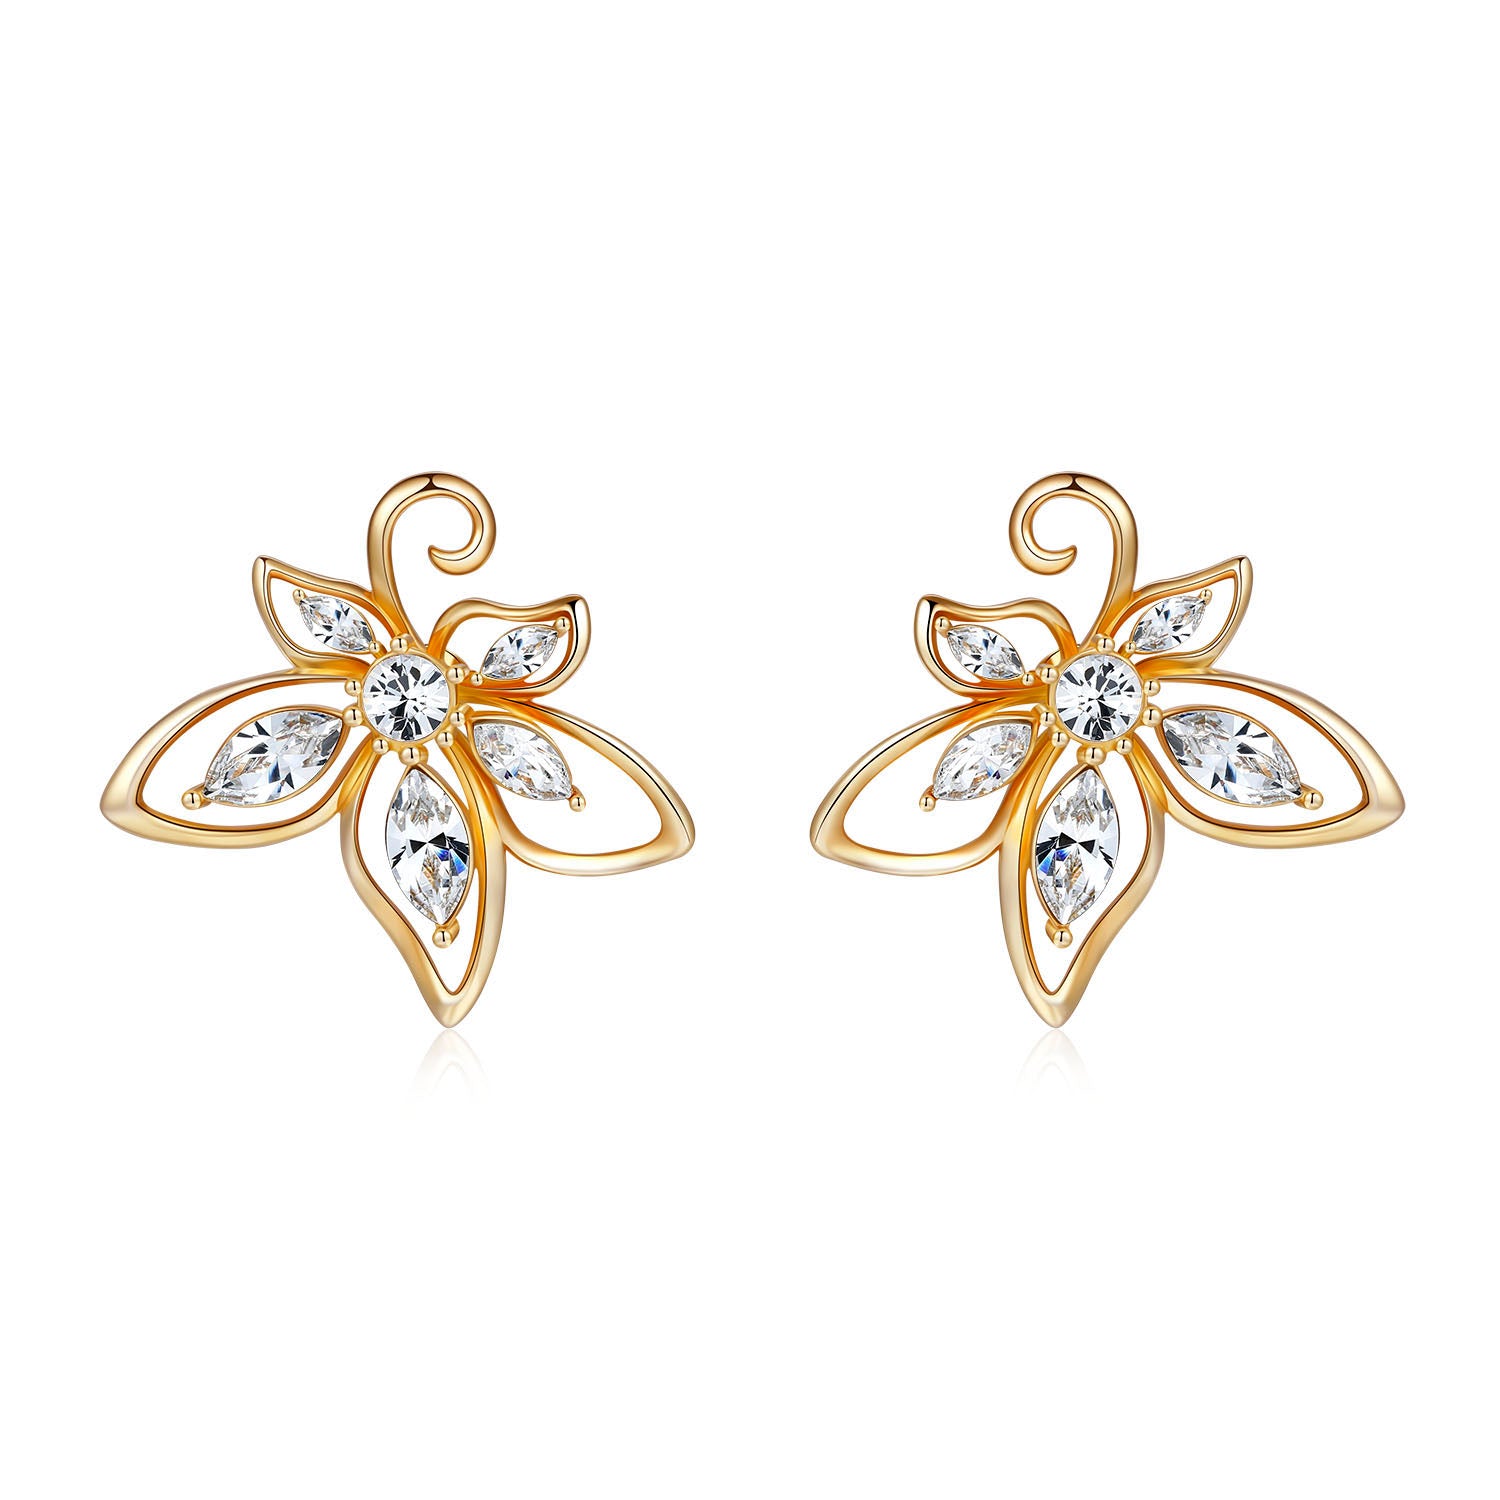 VICACCI 18K Yellow Gold Bauhinia Earrings with Swarovski Clear Crystals